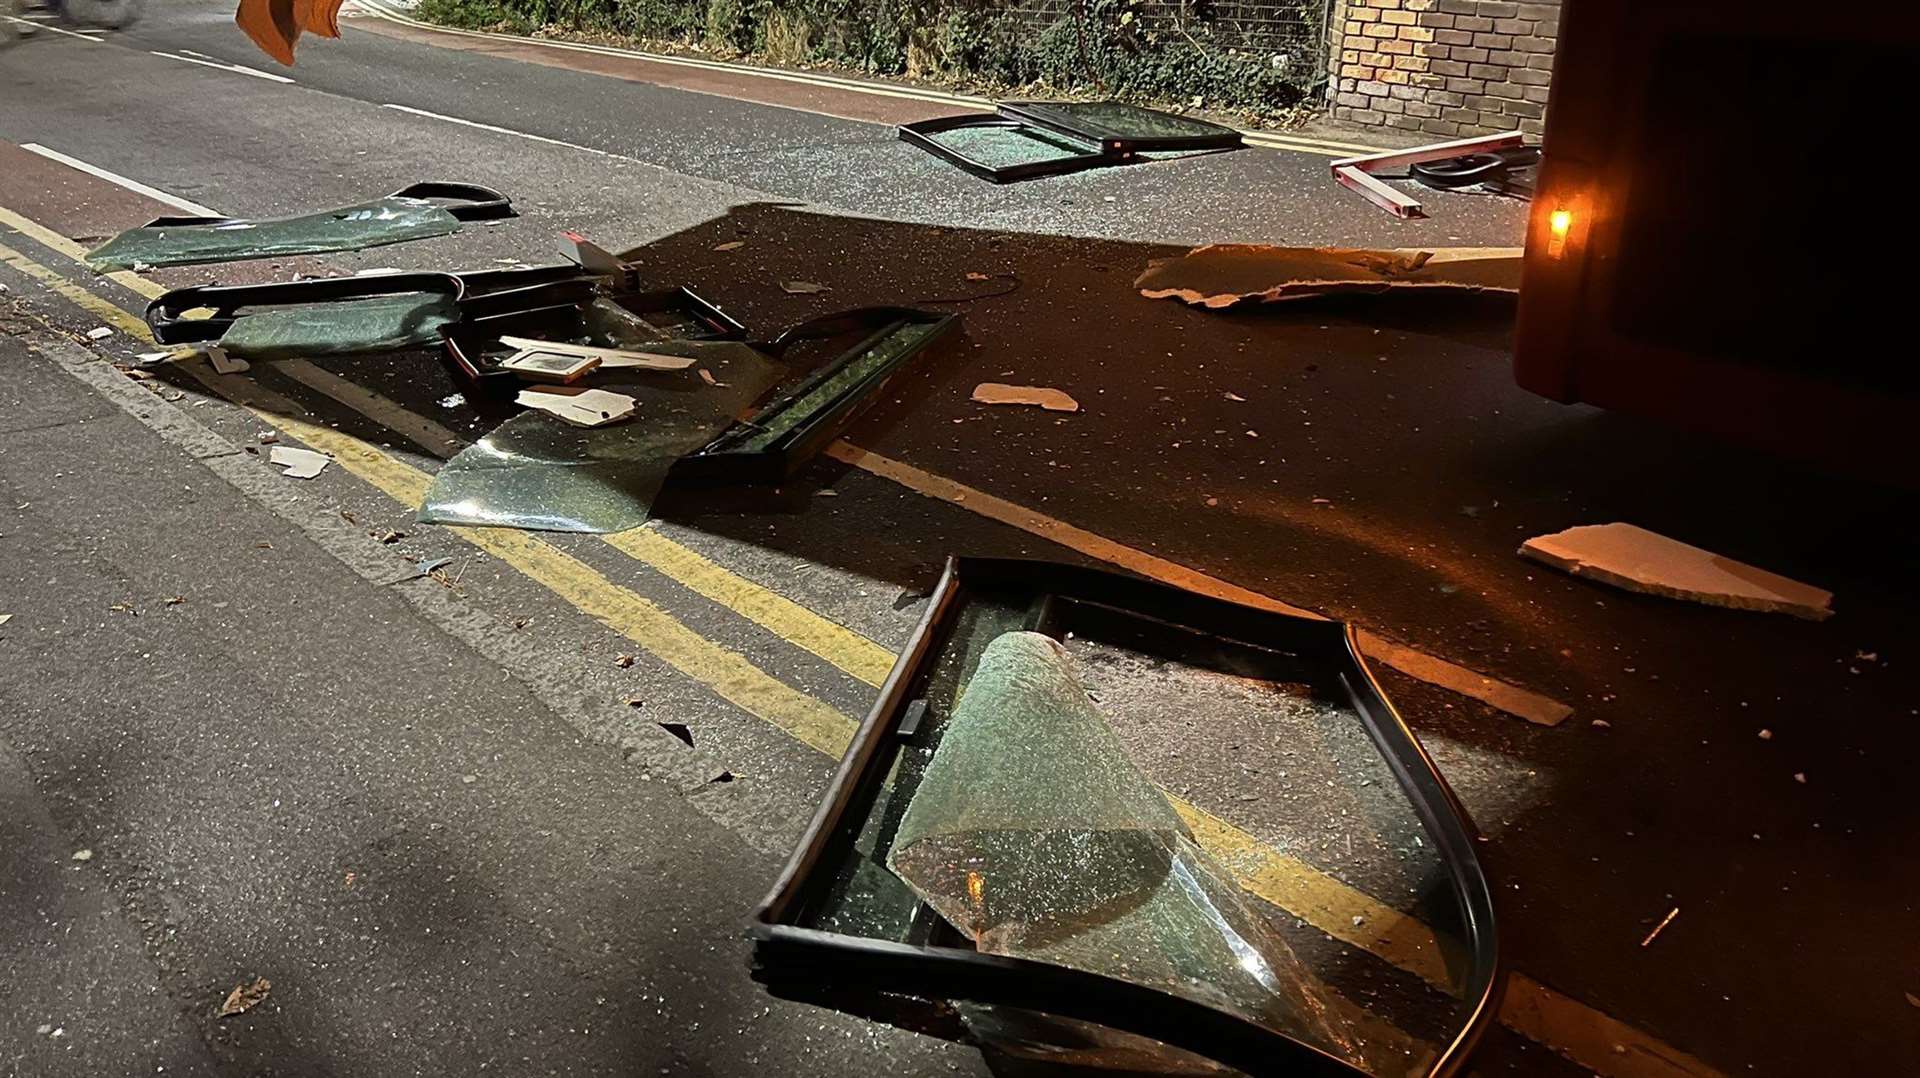 Debris from the collision was left scattered on the floor in Dartford. Picture: @chrispiela/Twitter